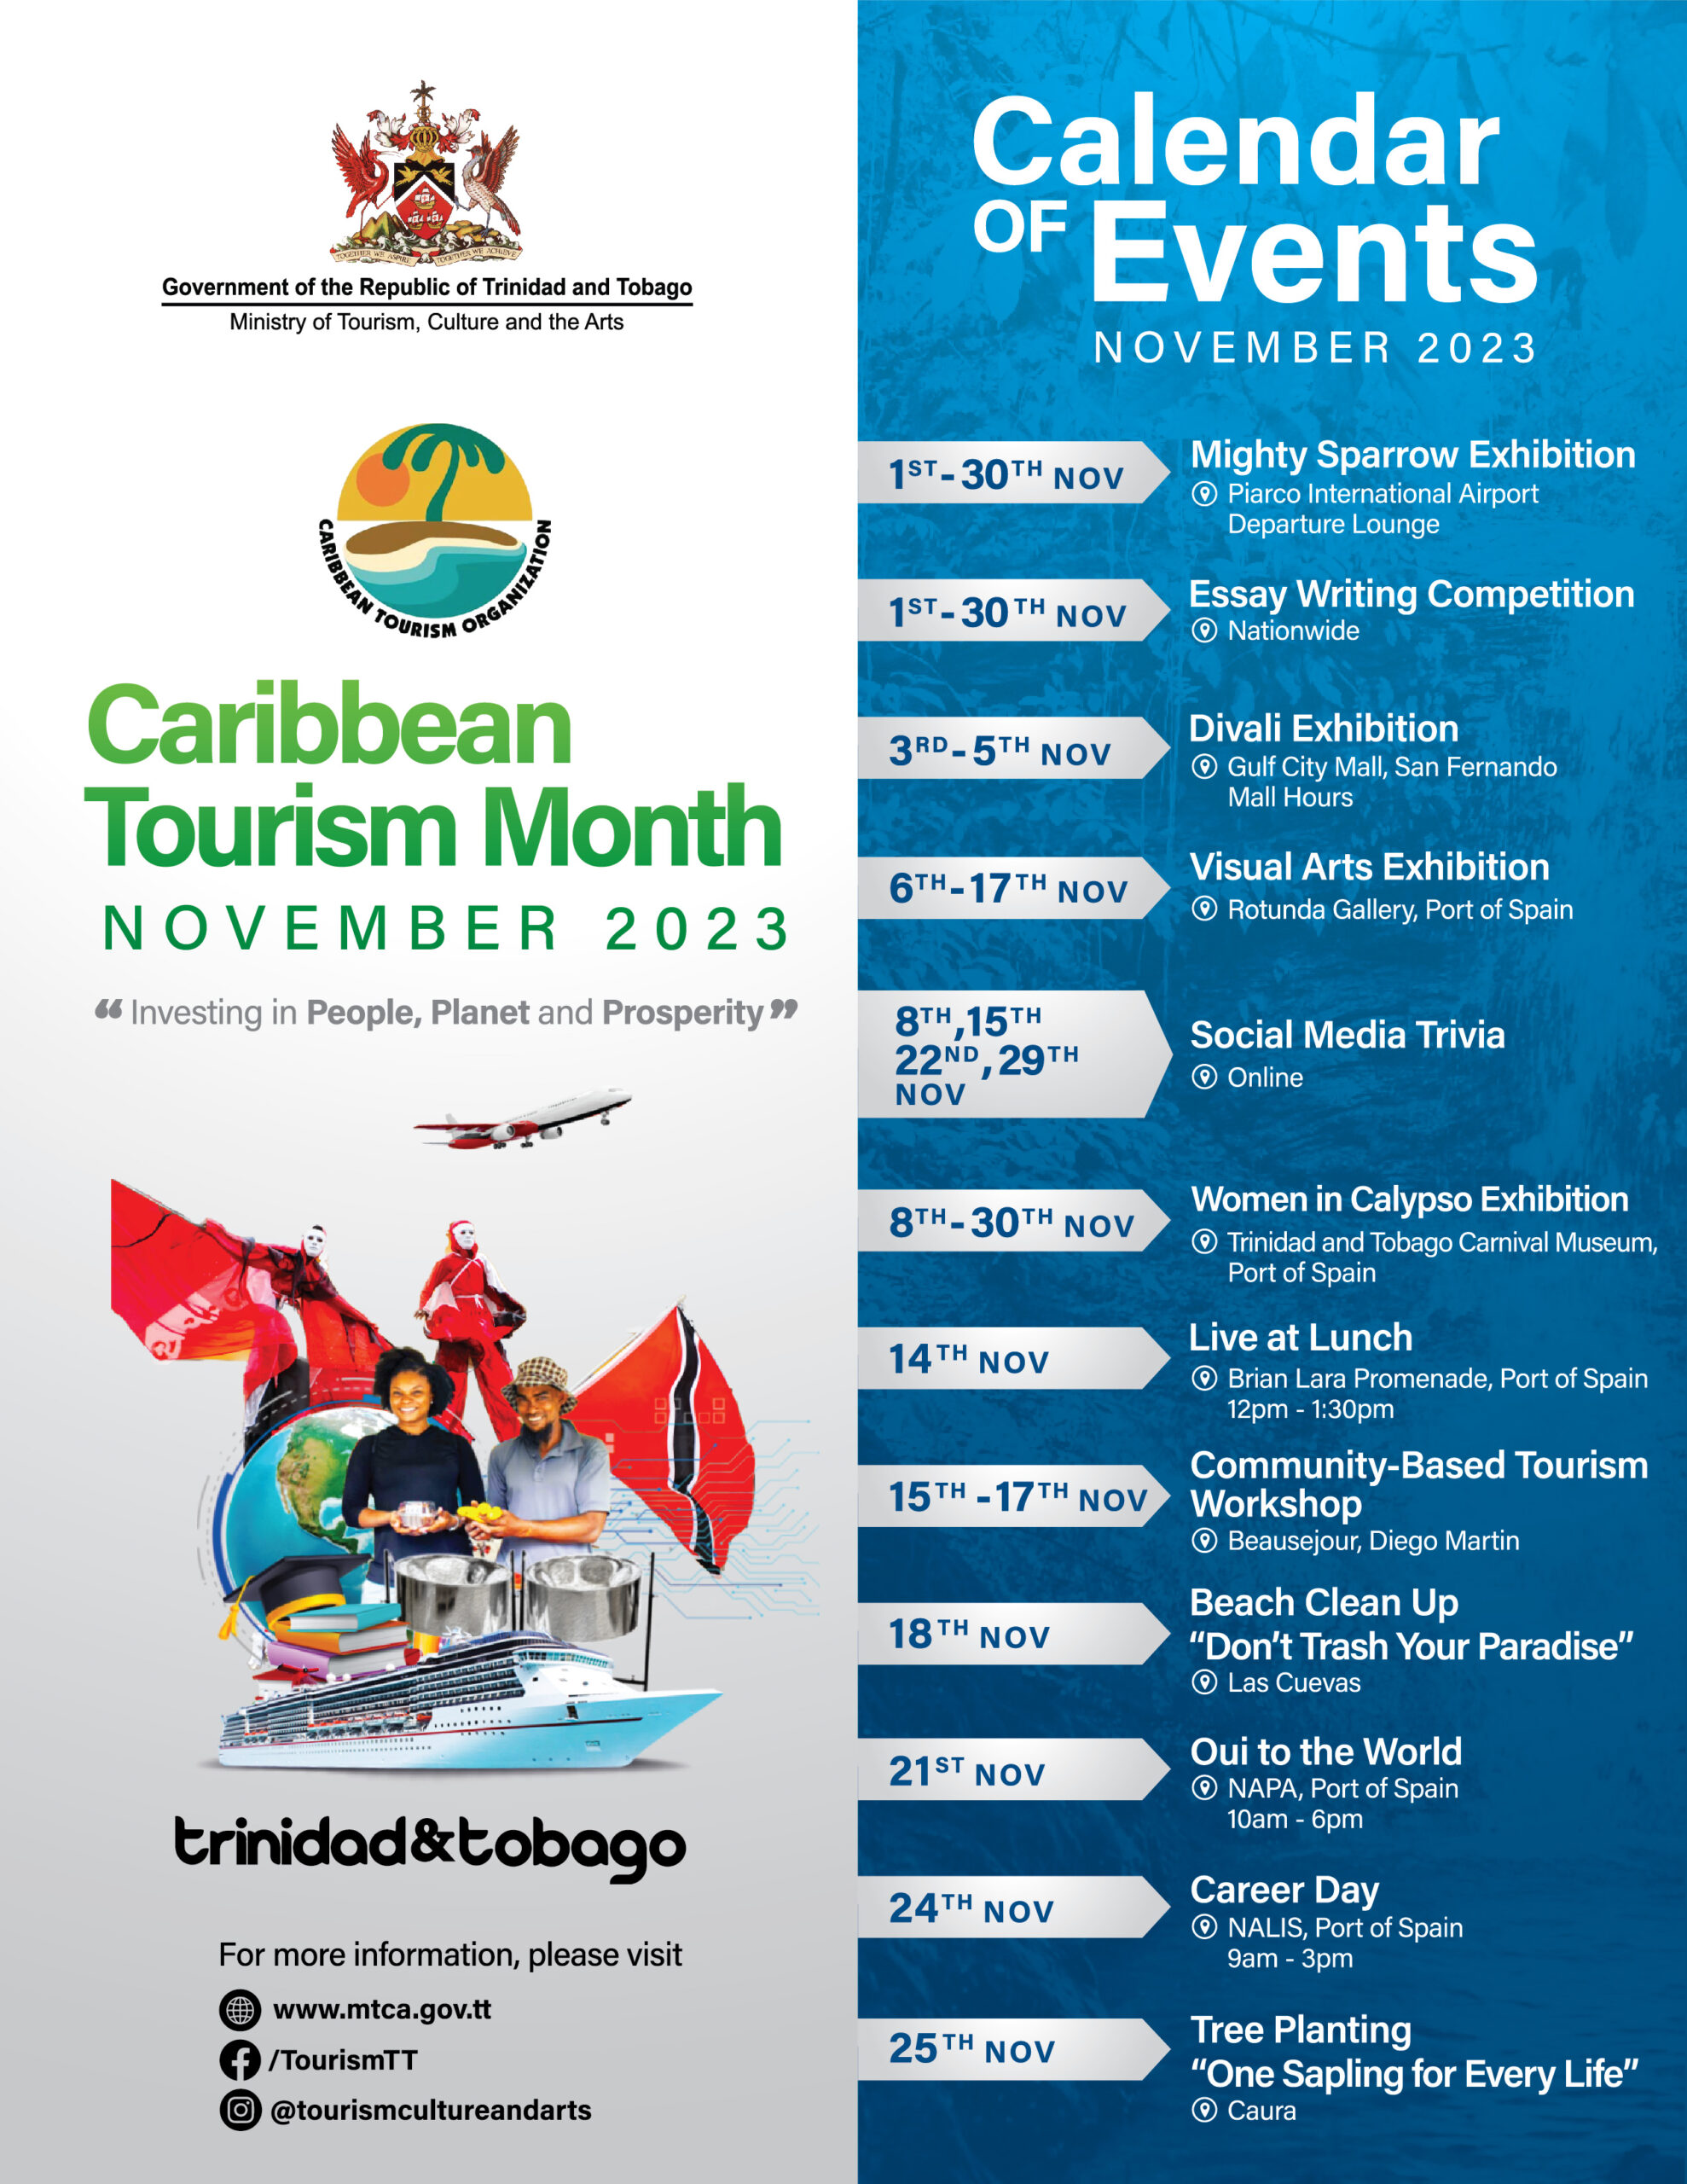 The Ministry of Tourism, Culture and the Arts Launches Caribbean Tourism Month 2023 Celebrations